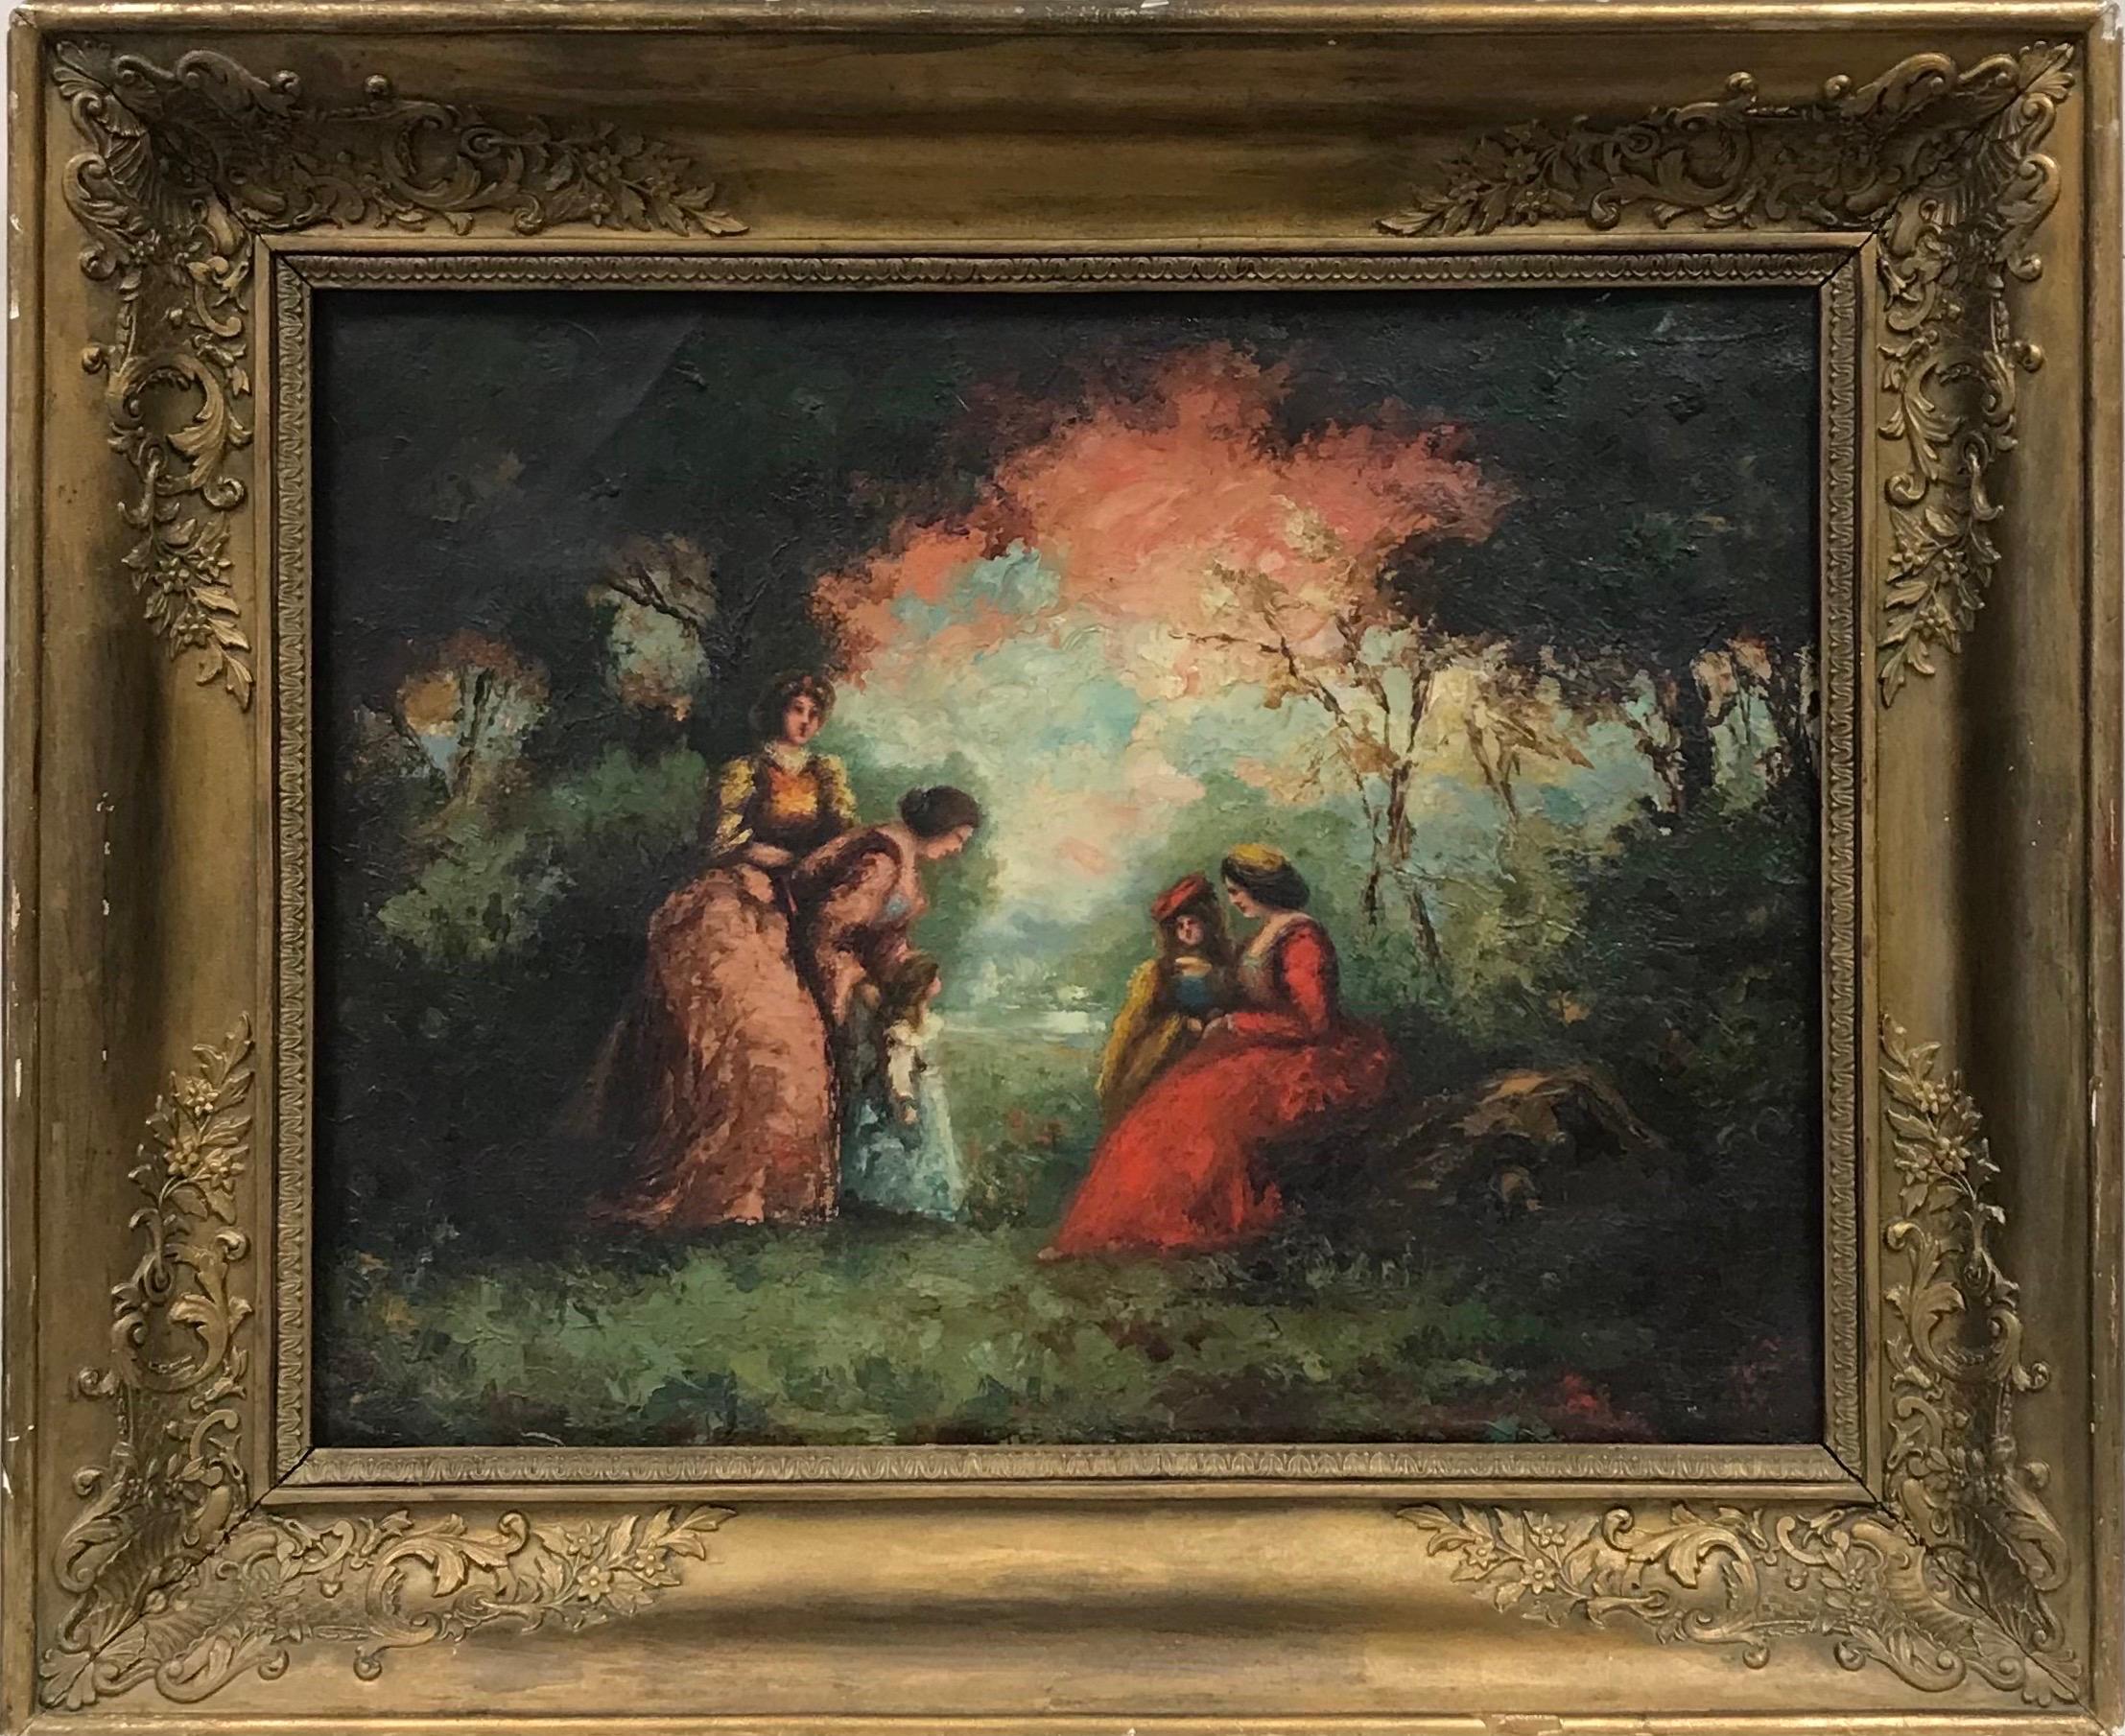 19th century French School Figurative Painting - Fine Antique French Oil Elegant Ladies in Sunlit Woodland, Superb Gilt Frame